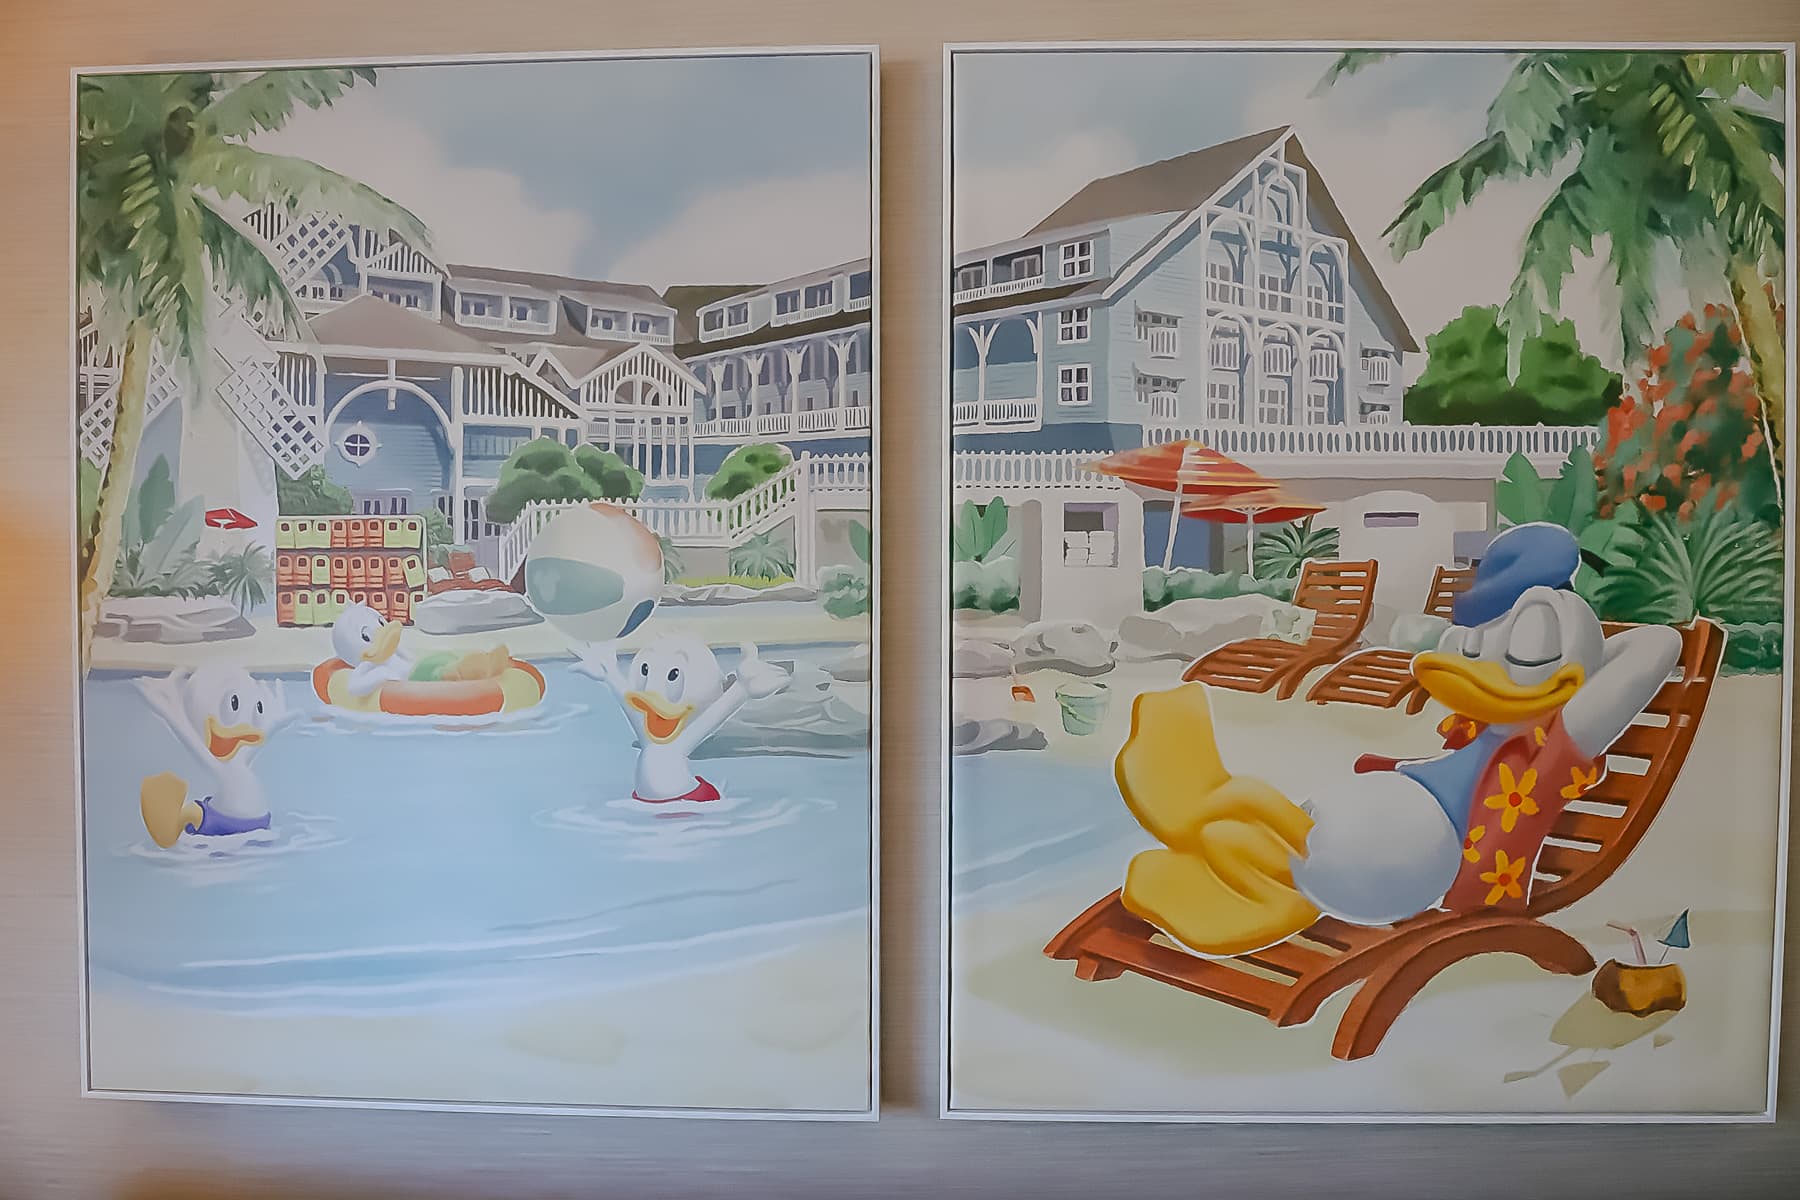 Donald Duck lounging on a beach chair in artwork